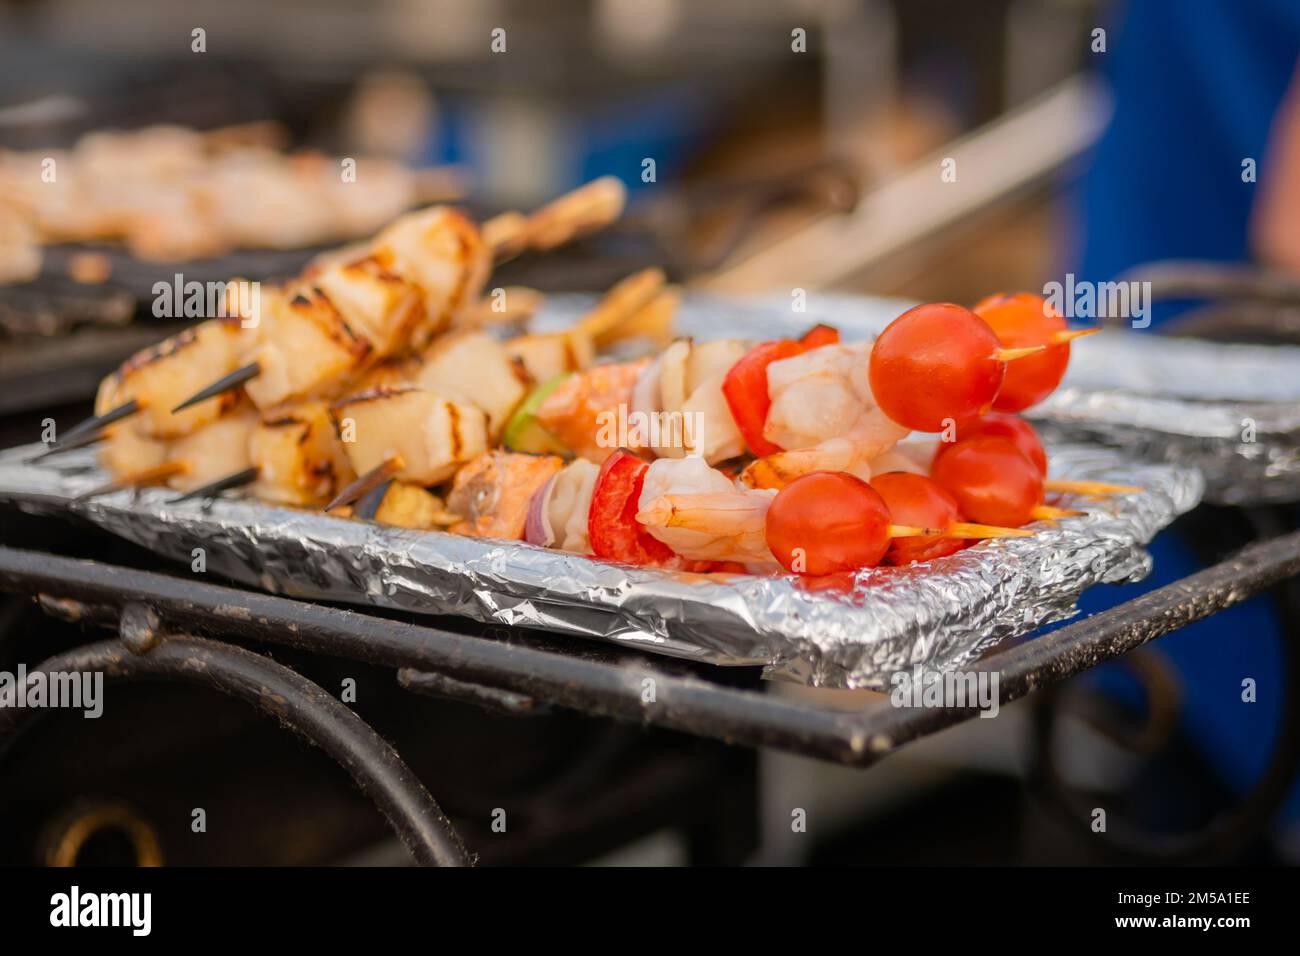 Cooked scallop and shrimp, prawn skewers, cherry tomato on foil - street food Stock Photo